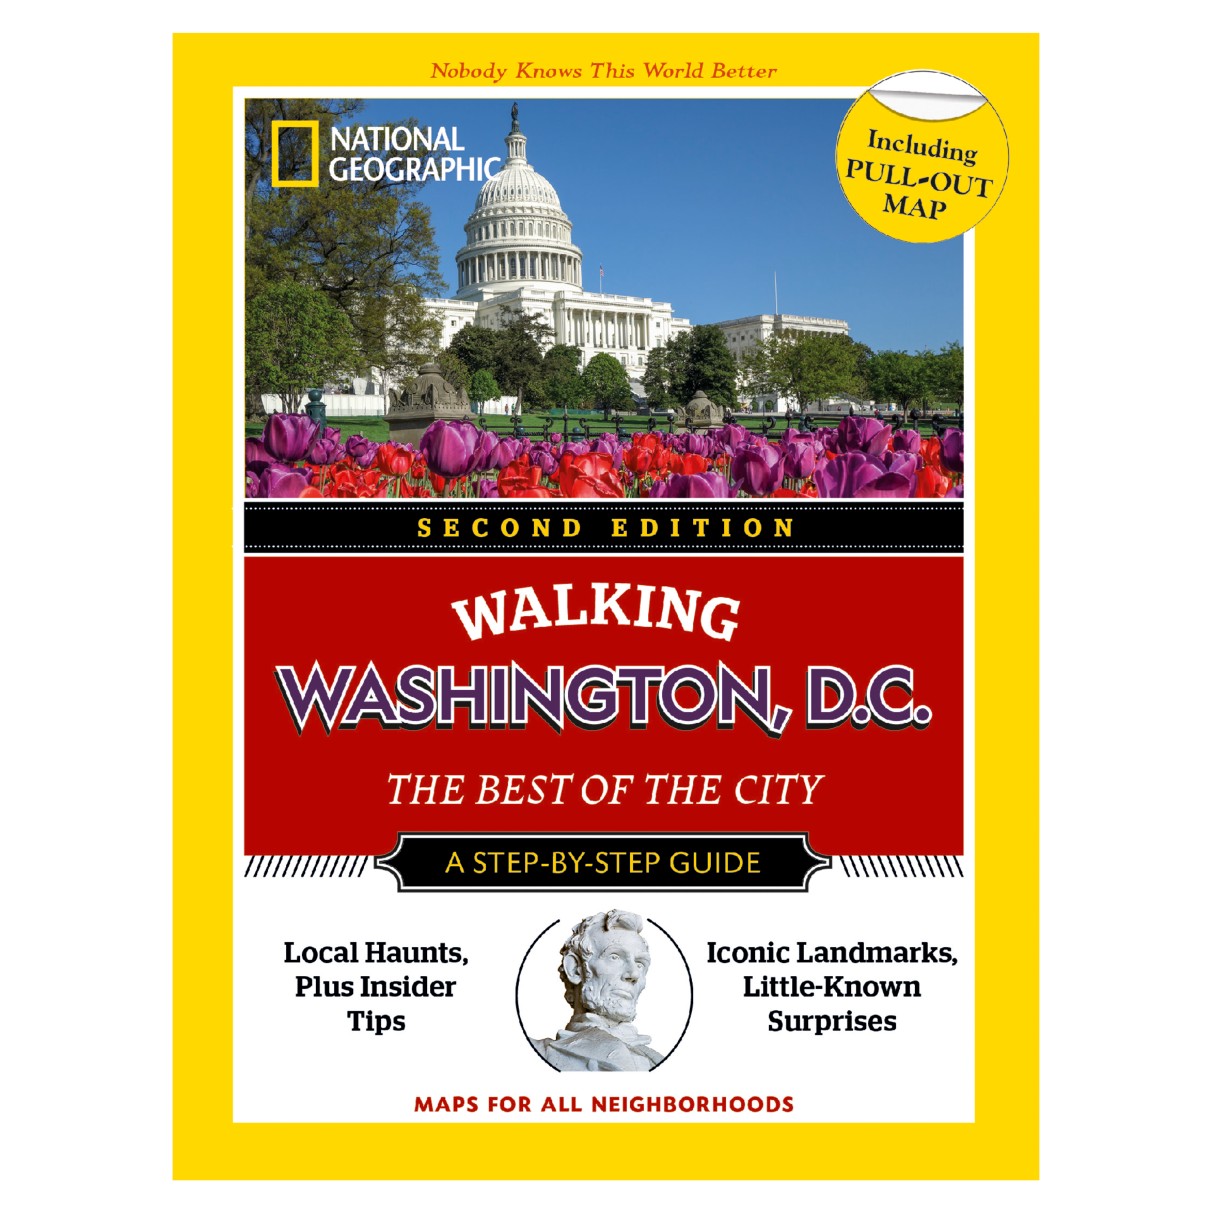 National Geographic Walking Washington, D.C.: The Best of the City Guide, Second Edition